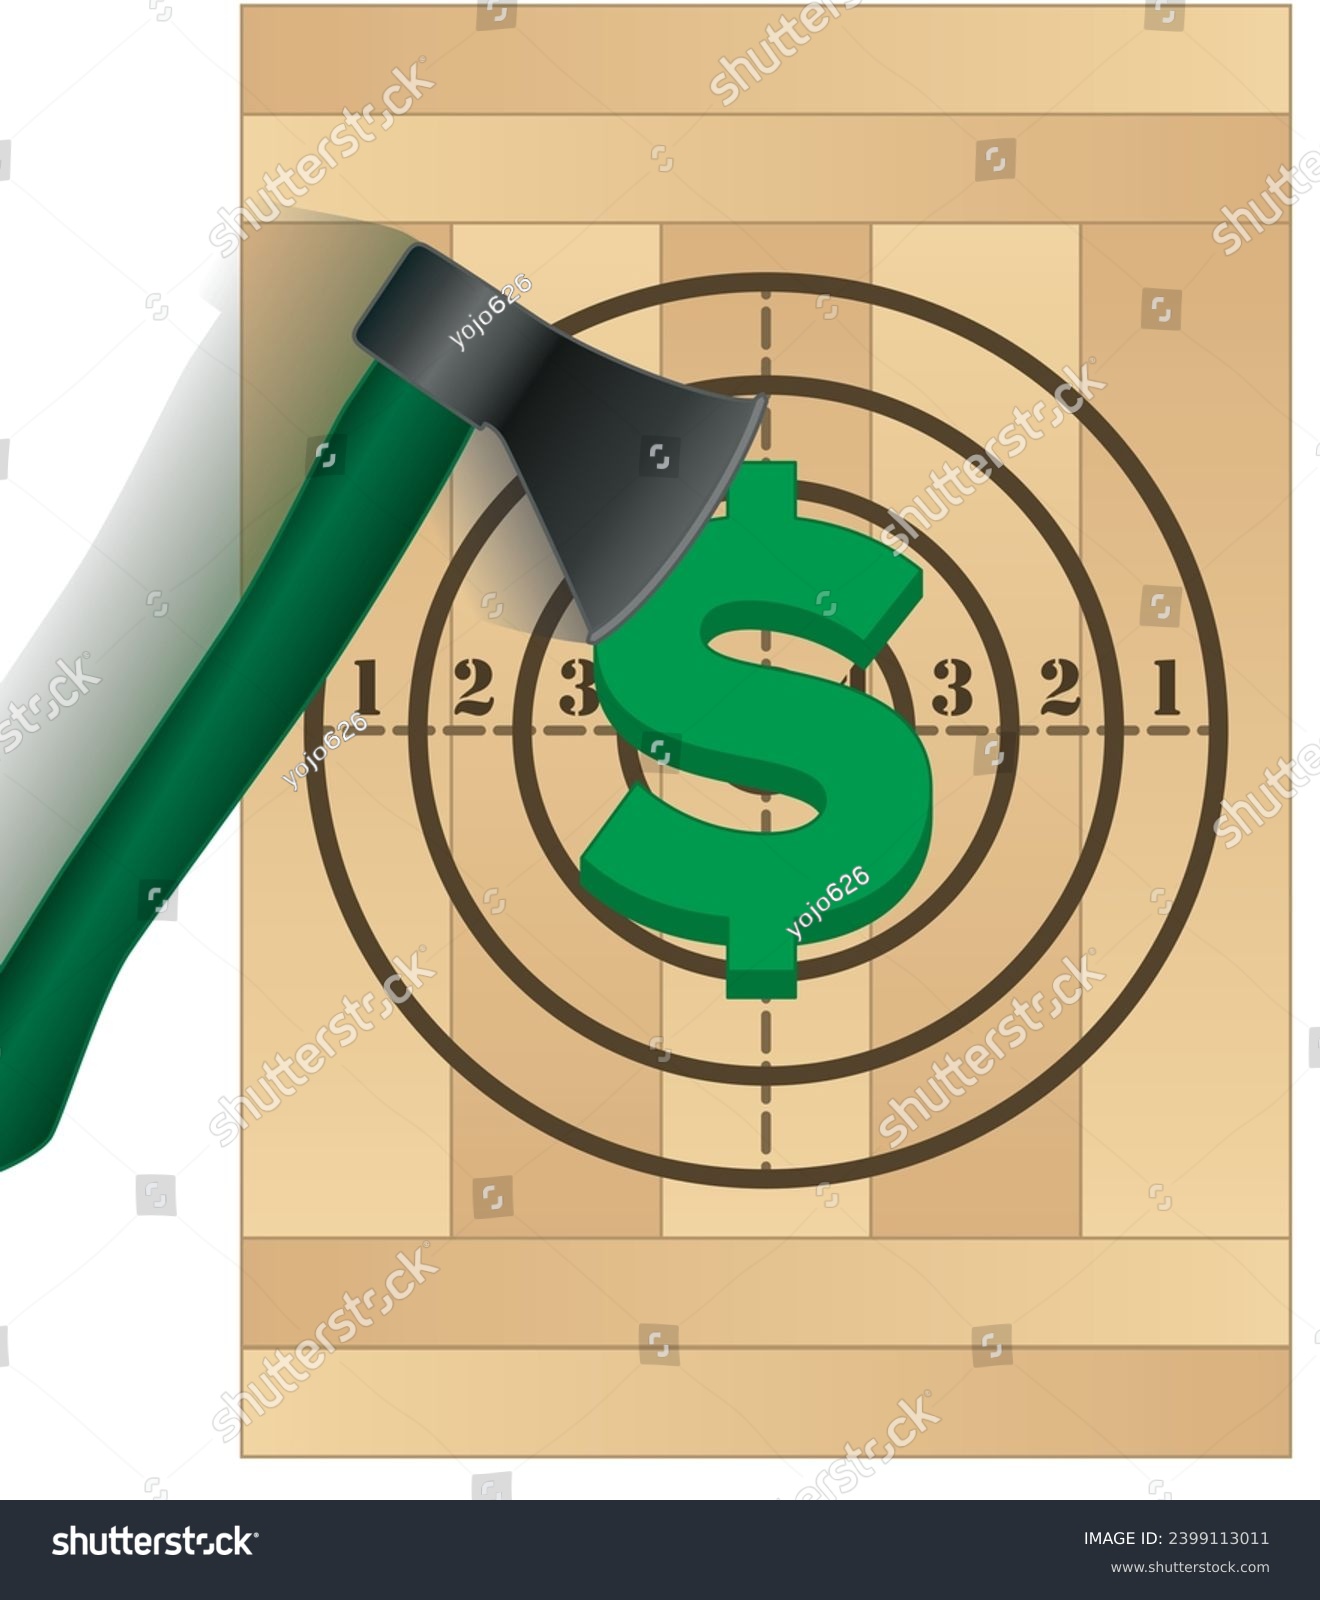 SVG of business, axe throwing showing motion aimed at dollar sign on target svg